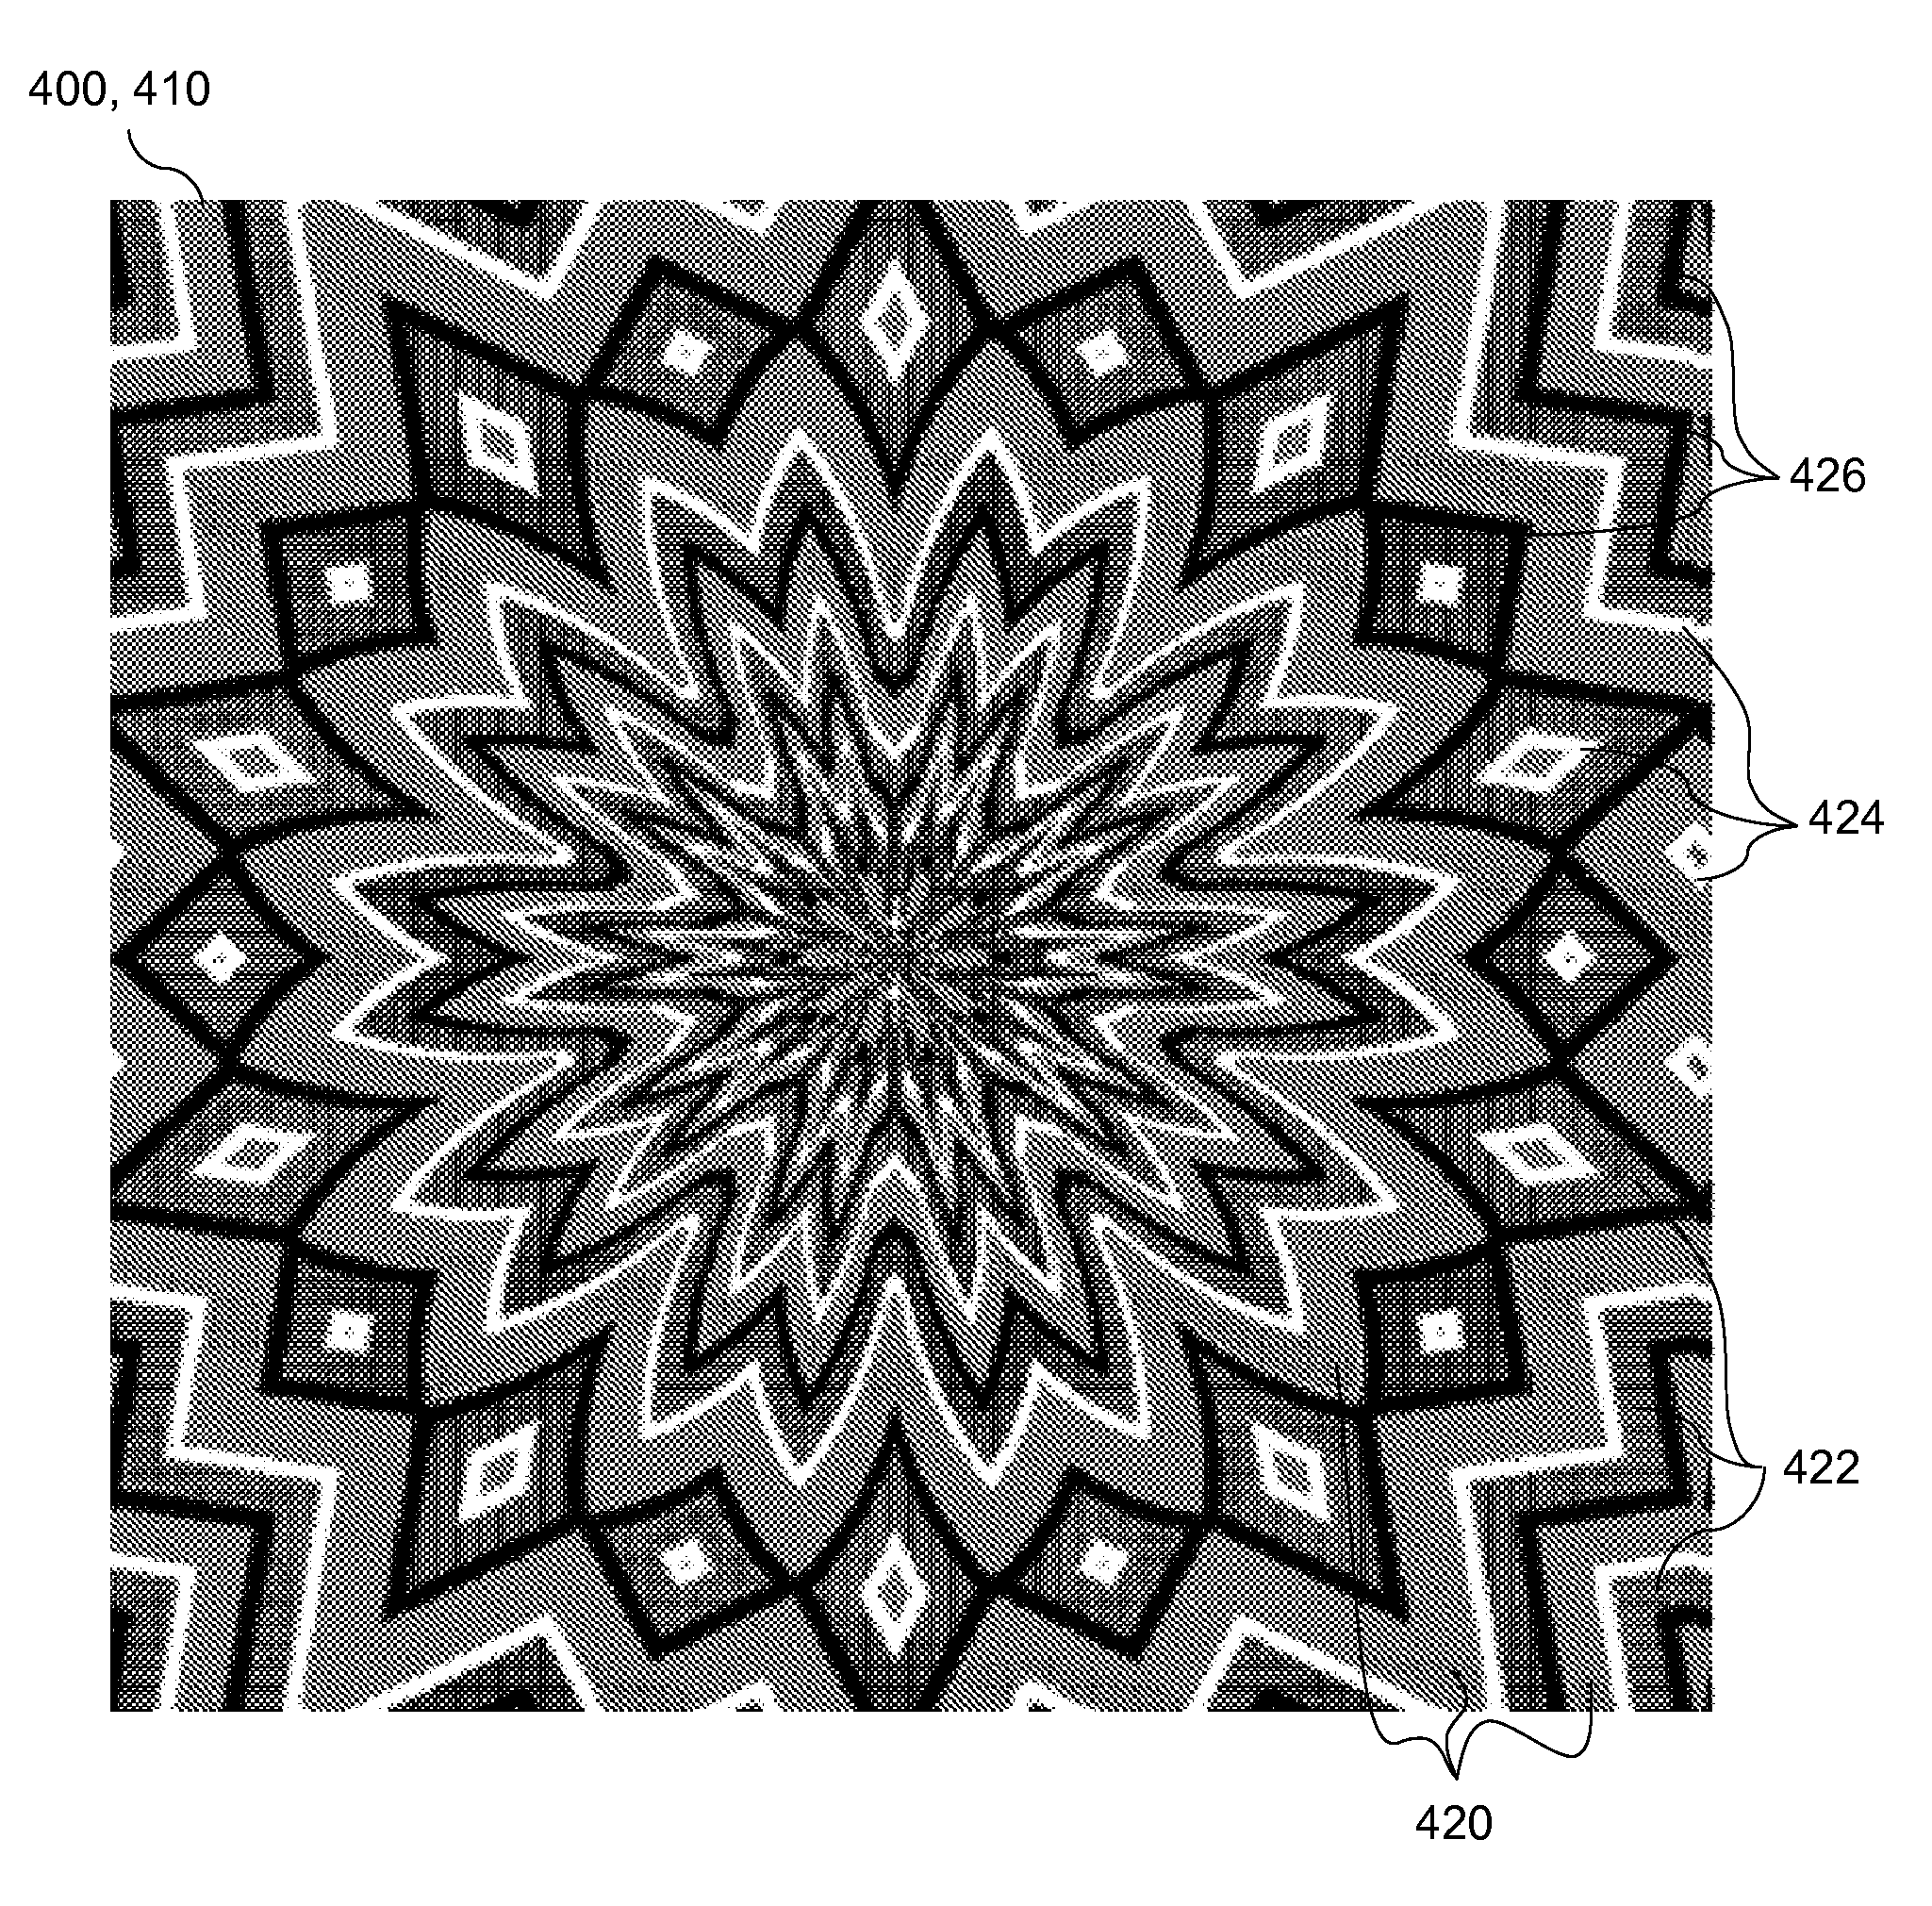 System for controlling dynamic optical illusion images